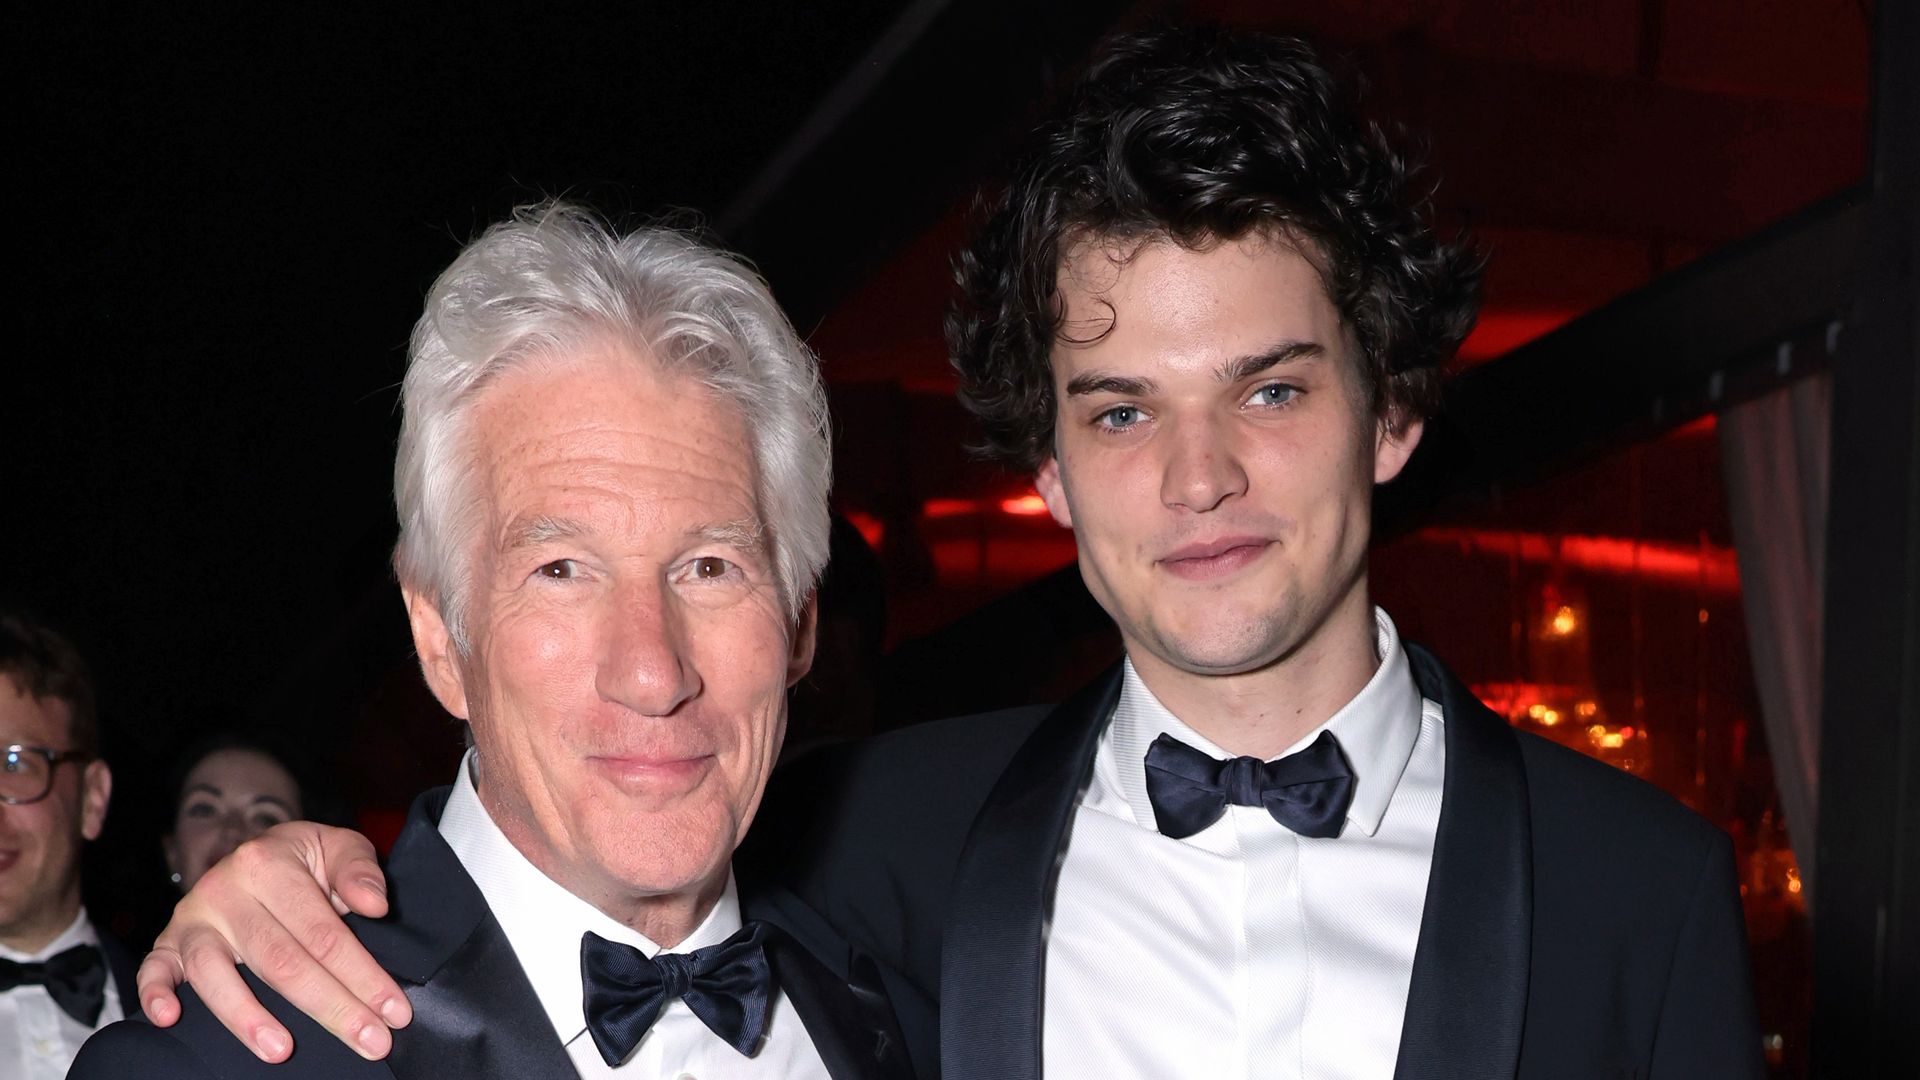 Richard Gere celebrates major 'milestone' for rarely-seen son Homer days after making Cannes red carpet appearance